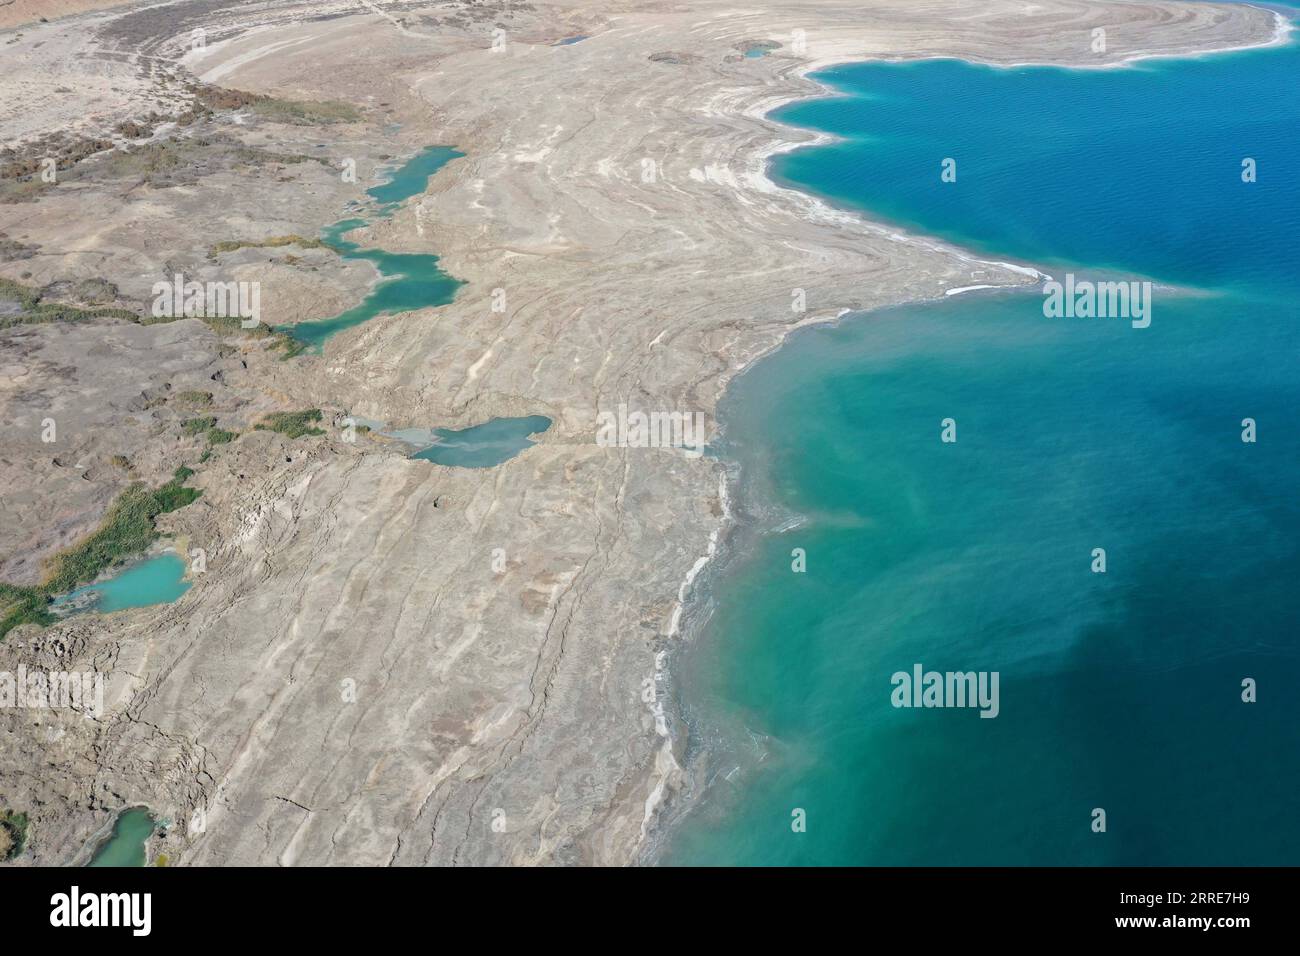 220204 -- DEAD SEA, Feb. 4, 2022 -- Aerial photo taken on Feb. 3, 2022 shows sinkholes on the shore of the Dead Sea near Ein Gedi beach, Israel. As the Dead Sea is shrinking and its water levels decreasing, hundreds of sinkholes are devouring land where the shoreline once stood. Photo by /Xinhua ISRAEL-DEAD SEA-SINKHOLES GilxCohenxMagen PUBLICATIONxNOTxINxCHN Stock Photo